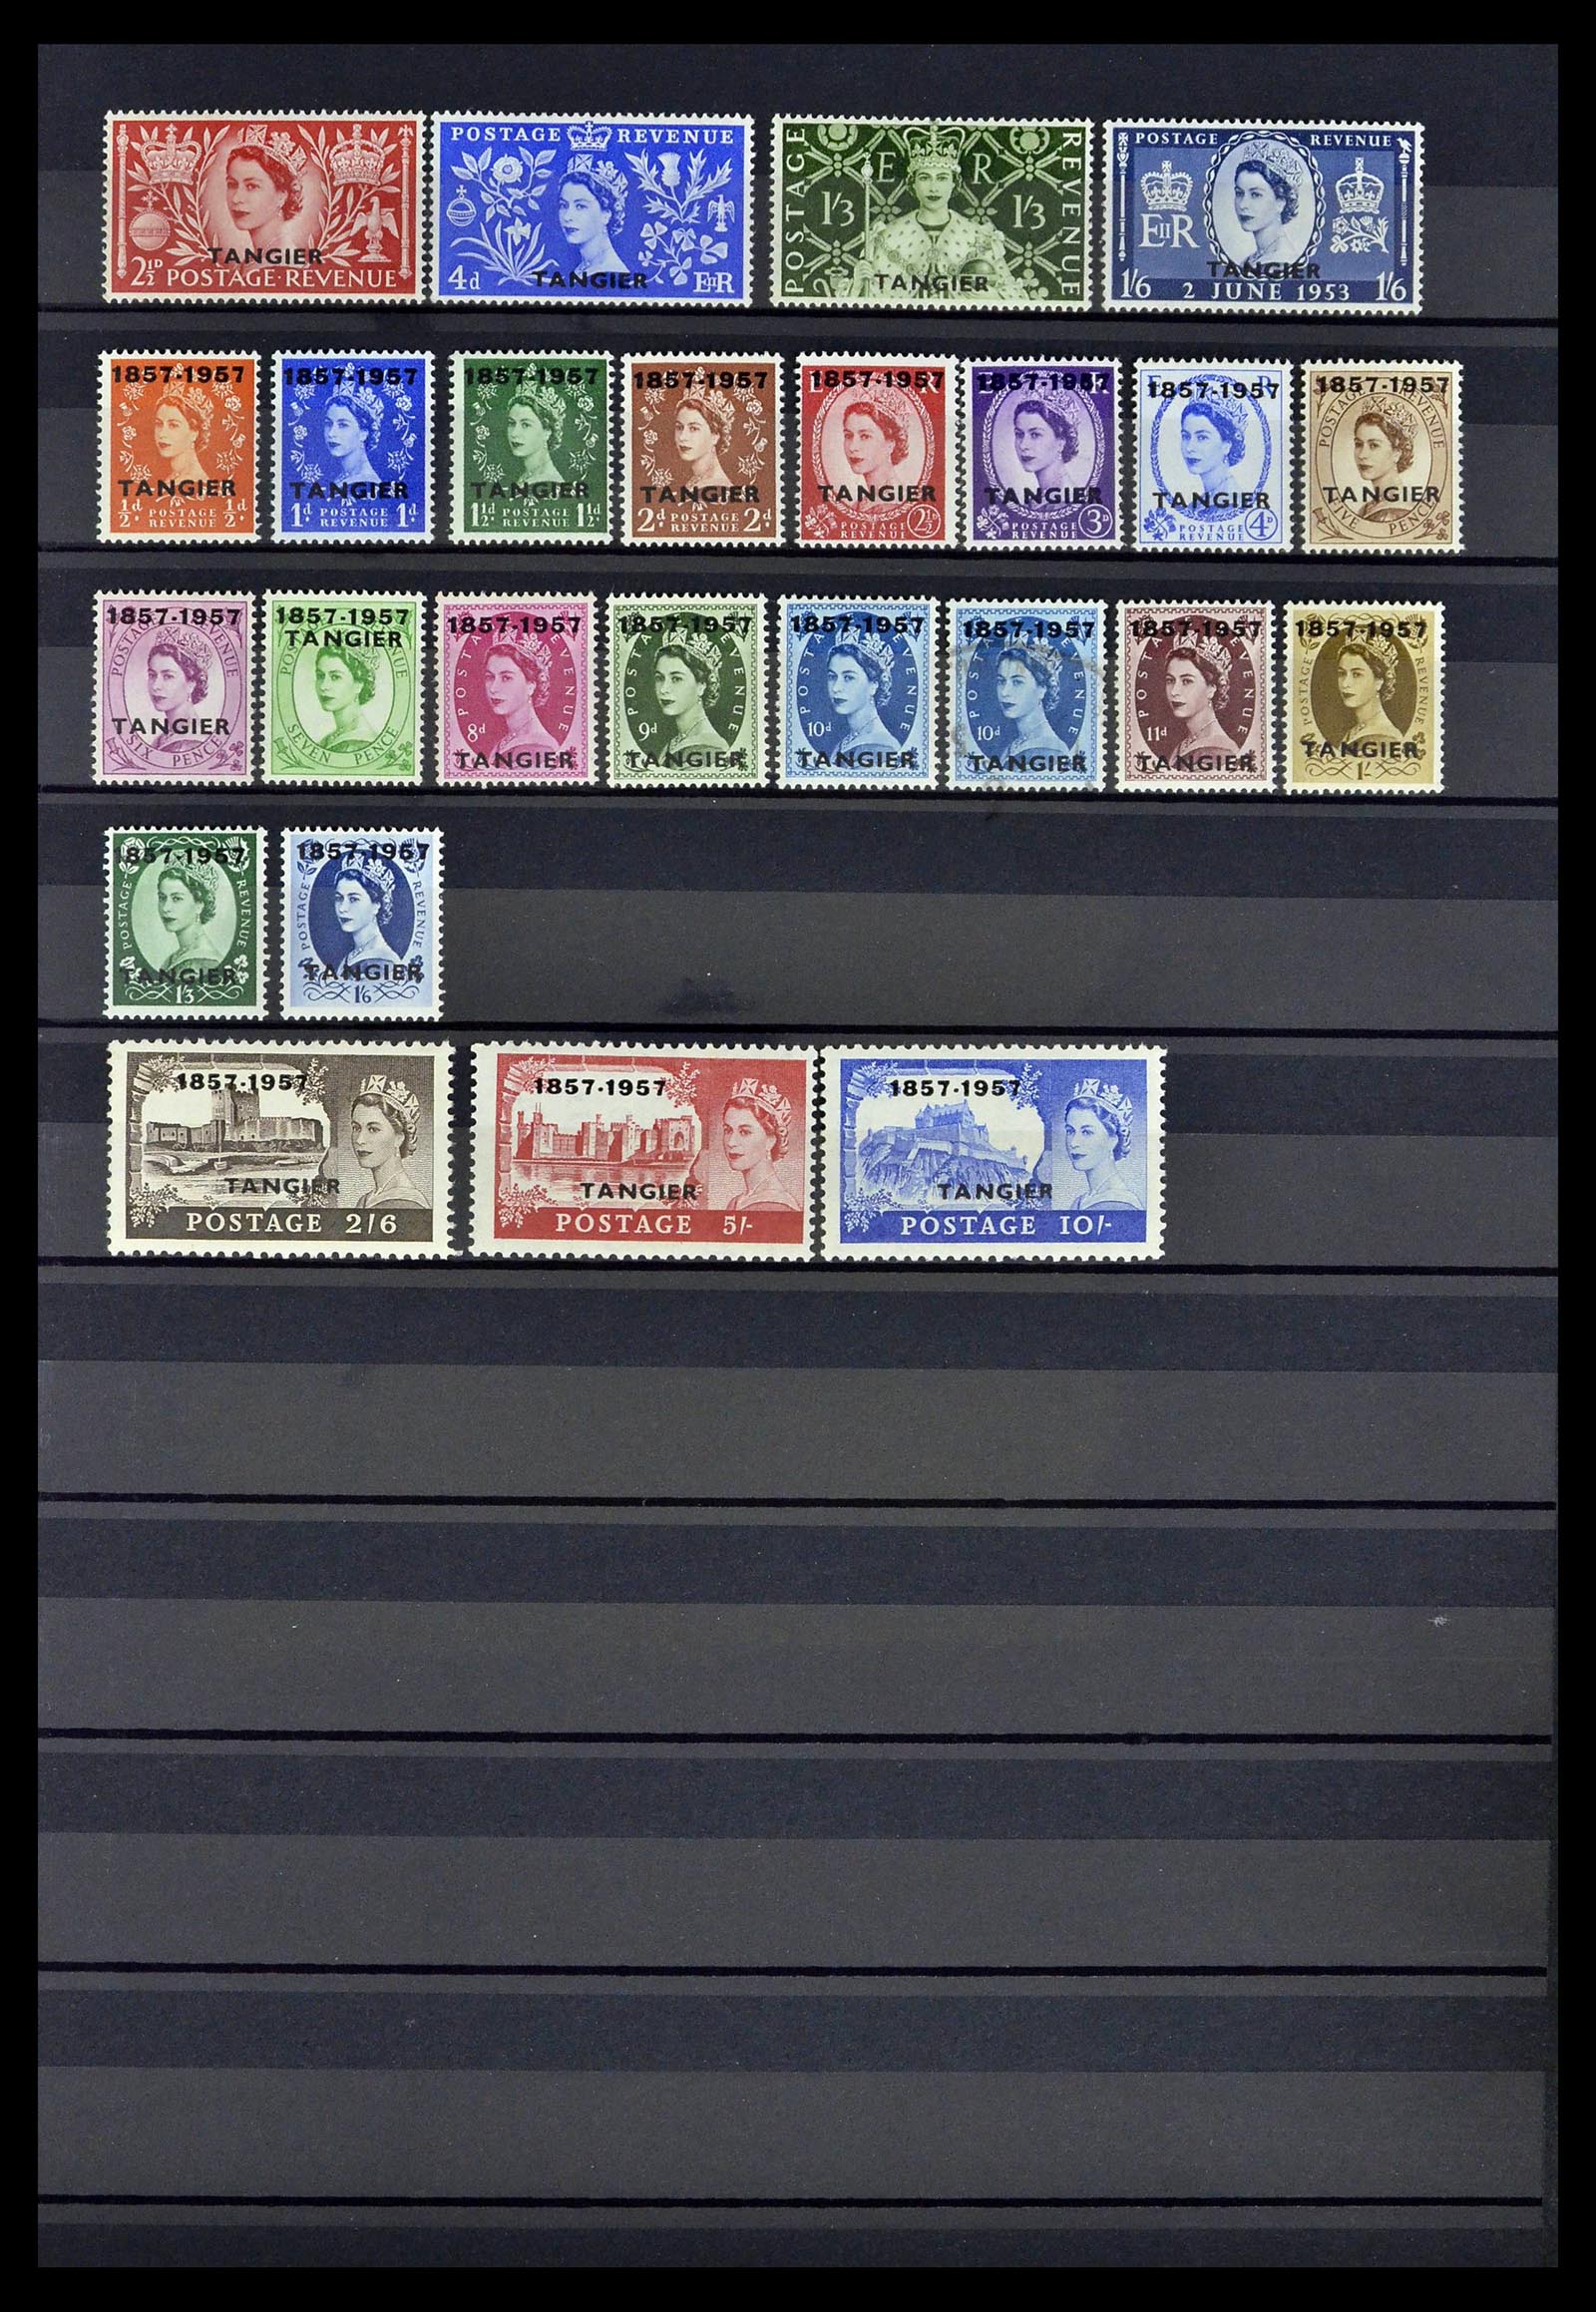 39409 0007 - Stamp collection 39409 British offices abroad 1885-1957.